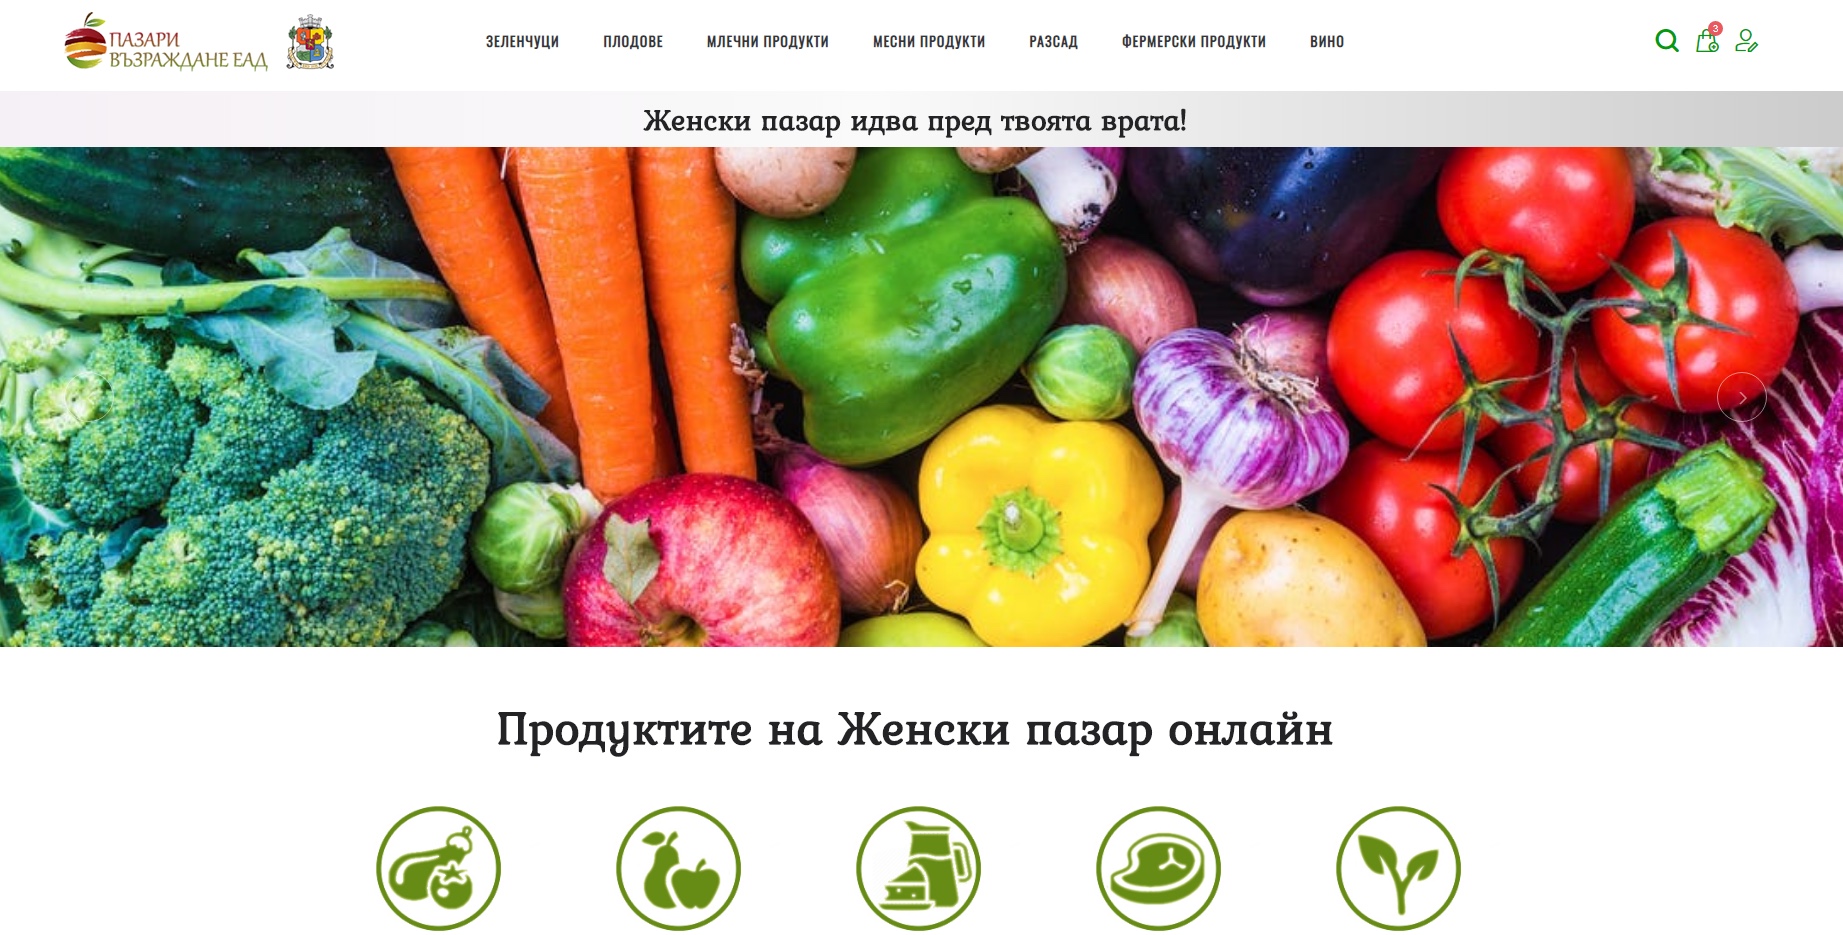 Paper 24 chasa: With a dedicated online application, the products from the Zhenski Pazar Market reach every door